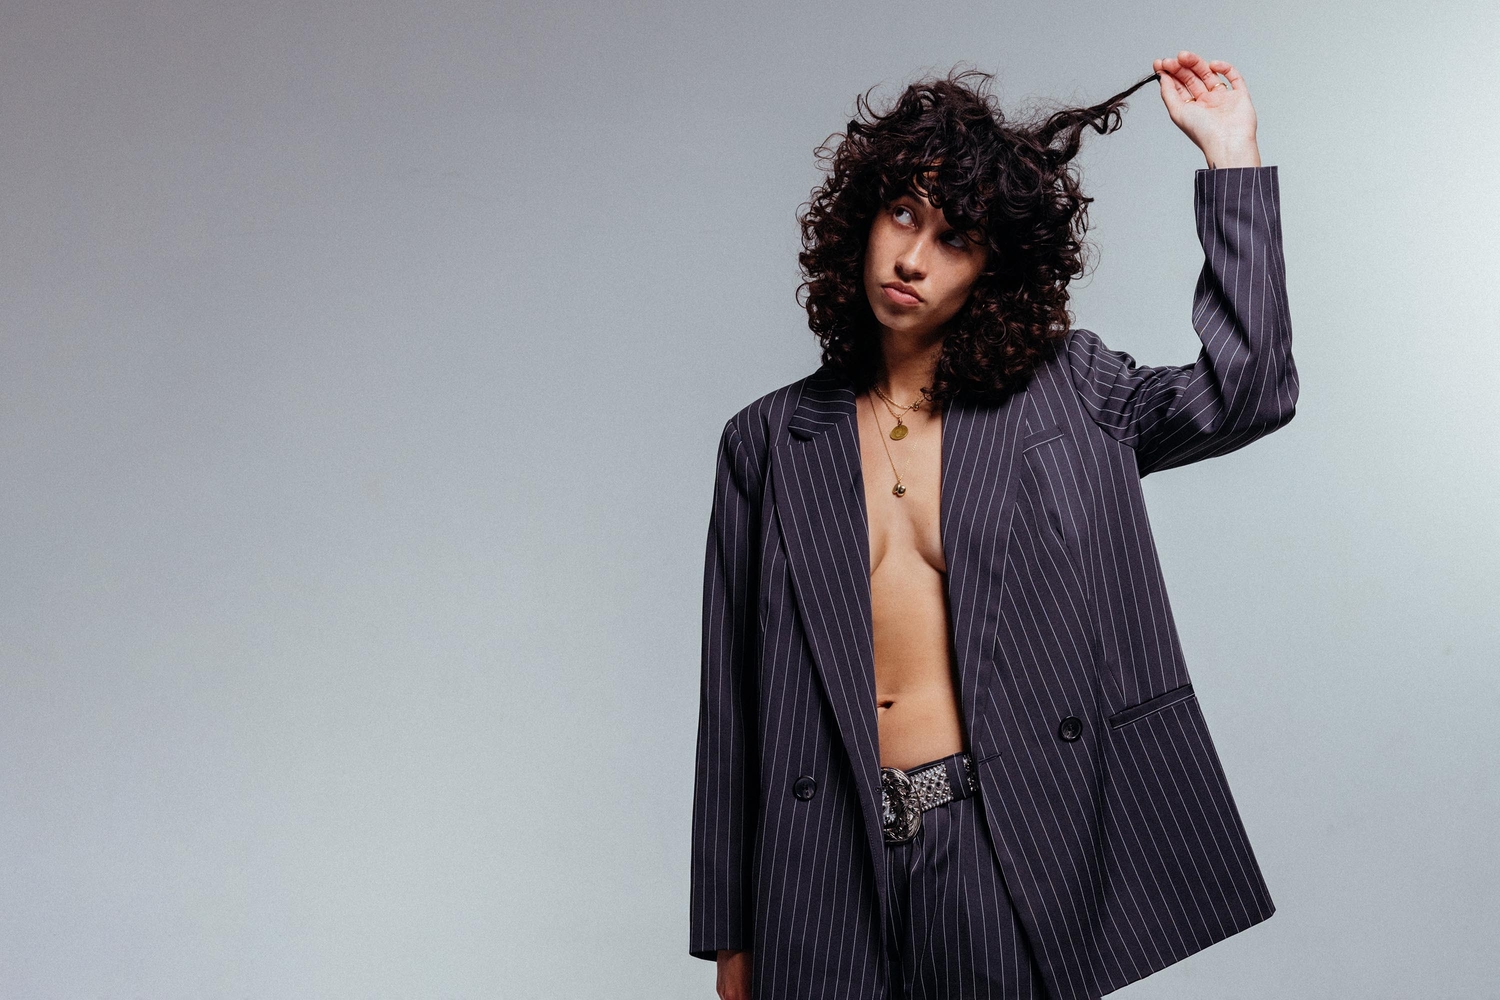 Towa Bird: “I think people want queer music”